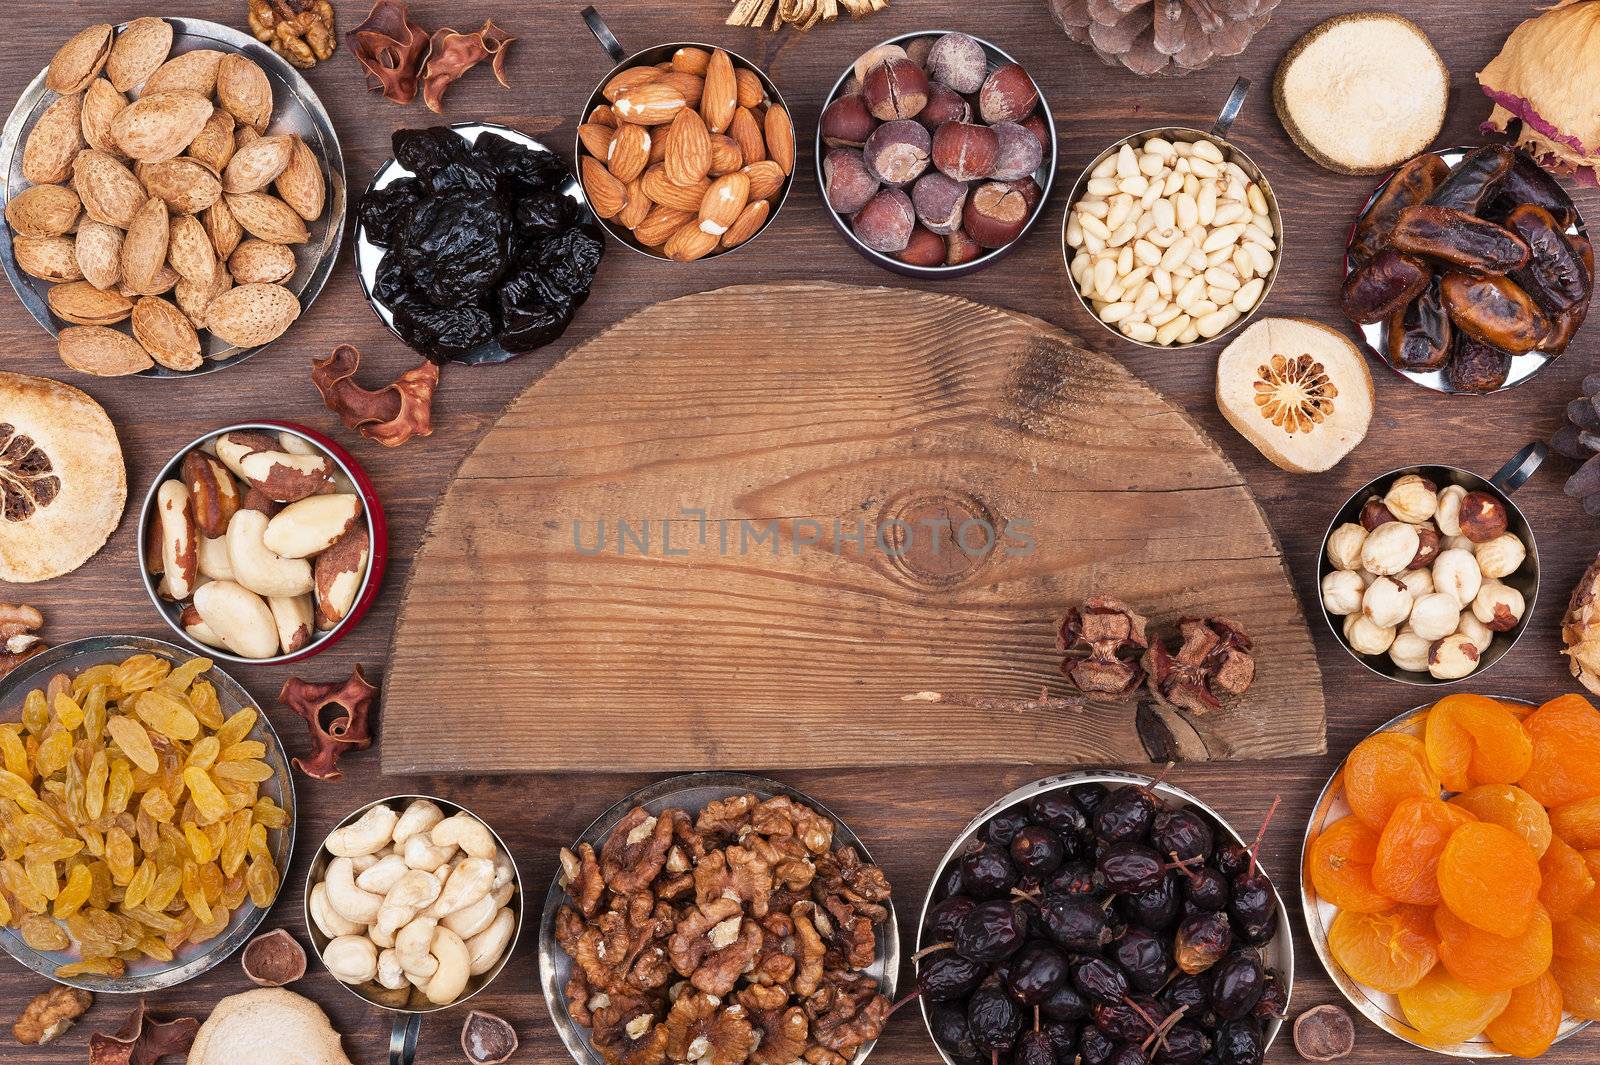 Wooden semi-circle, surrounded by nuts and fruits